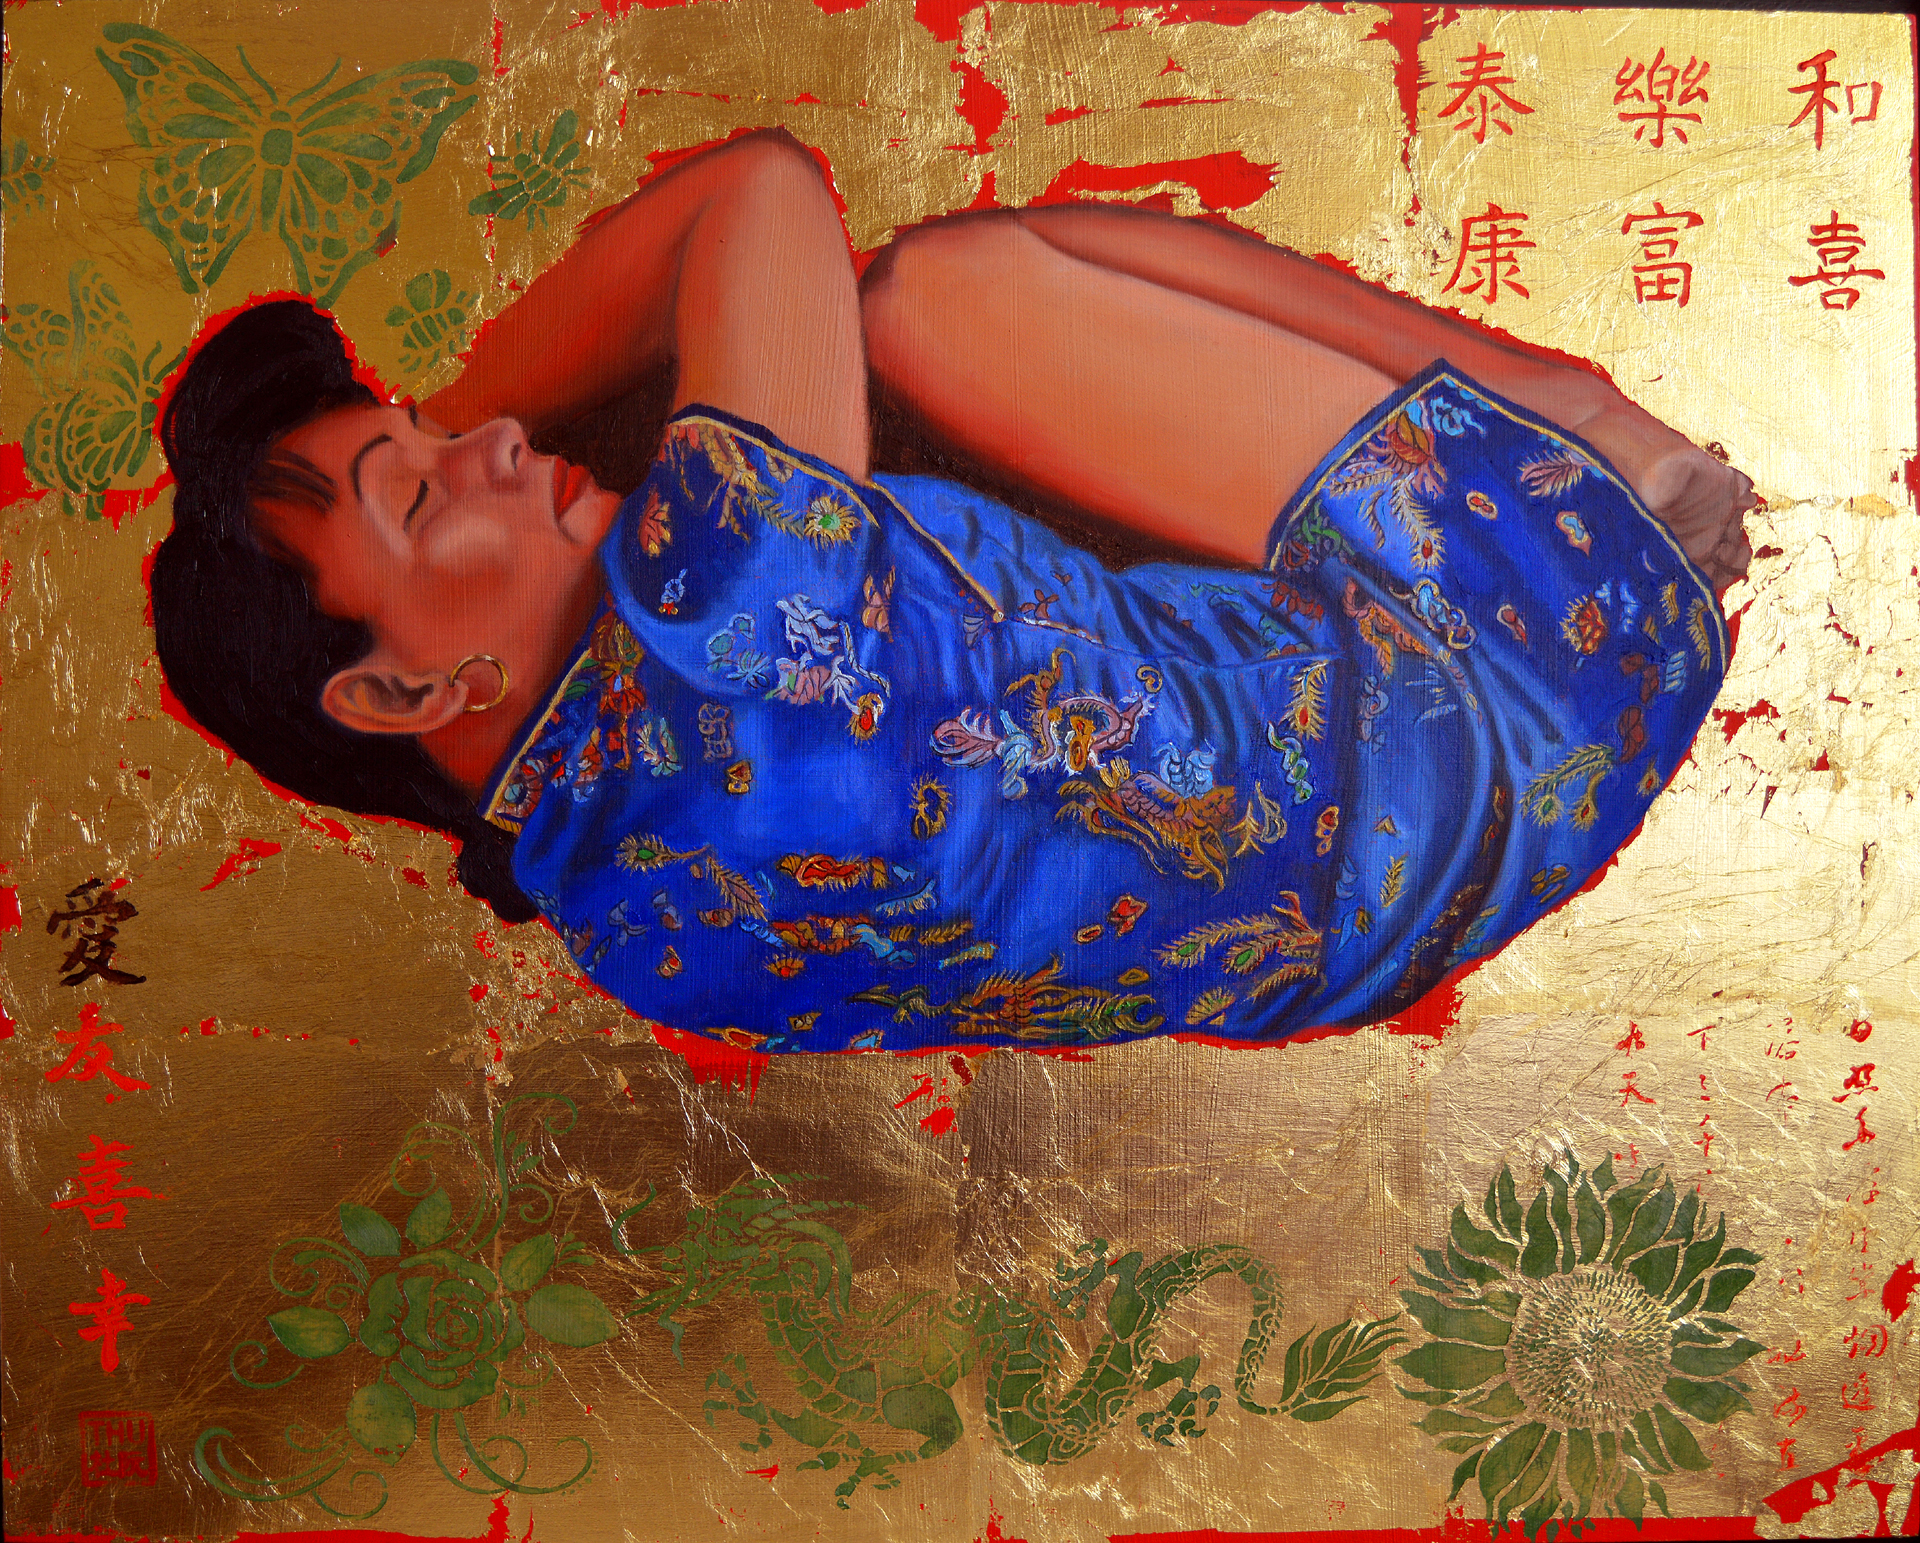 Thu Nguyen; The Dream, 2019, Original Painting Oil, 16 x 20 inches. Artwork description: 241 Painting with the image of a sleeping, crouching Chinese Woman.  Medium- format painting with a combination of different materials and techniques - from relief acrylic to luxurious 24 kt gold leaf.Original paintingThe Dreamby Thu NguyenPainting is created on a panel and has a relief.  The painting ...